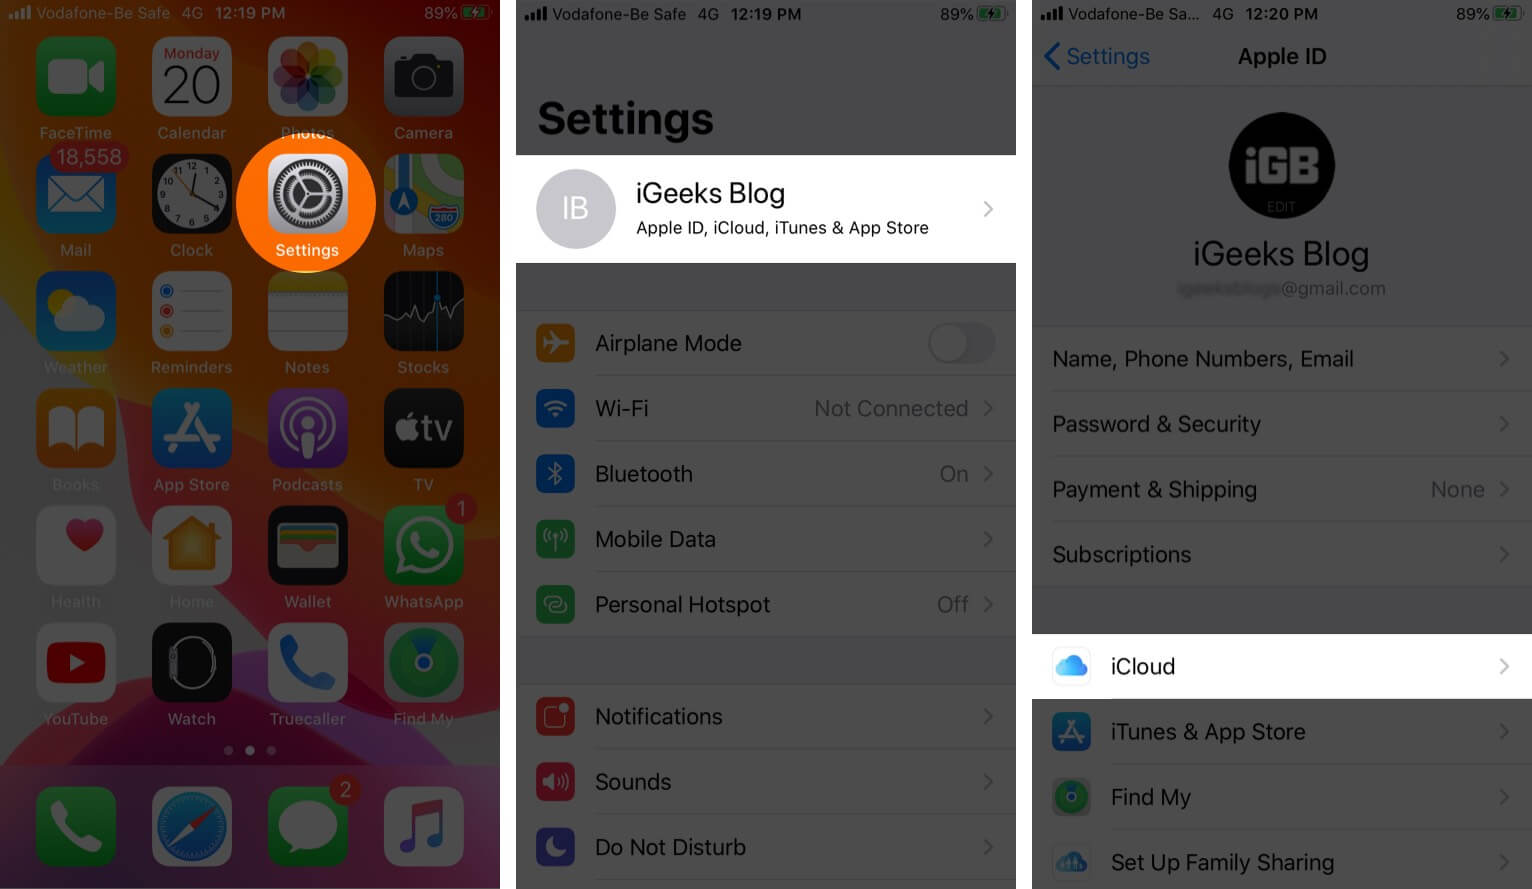 Open Settings Tap on Profile and Then Tap on iCloud on iPhone